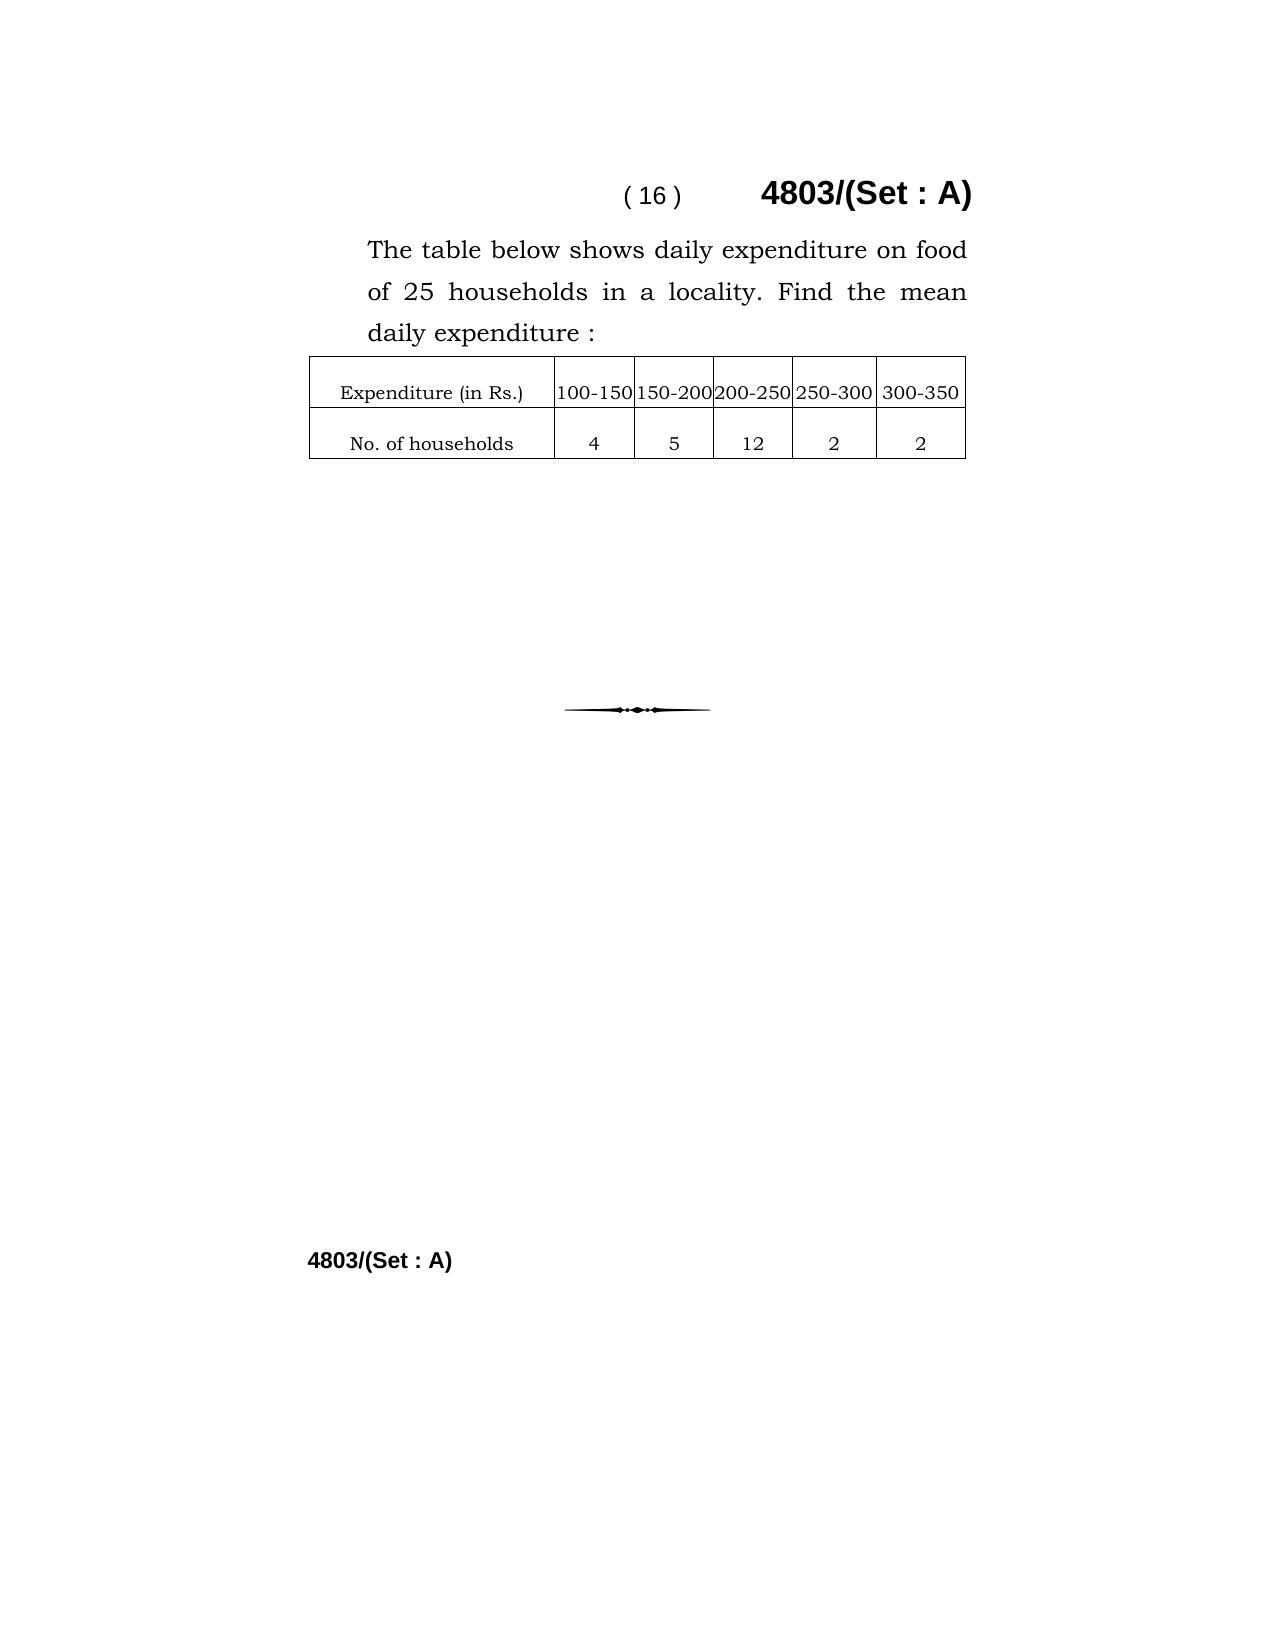 Haryana Board HBSE Class 10 Mathematics 2020 Question Paper - Page 16